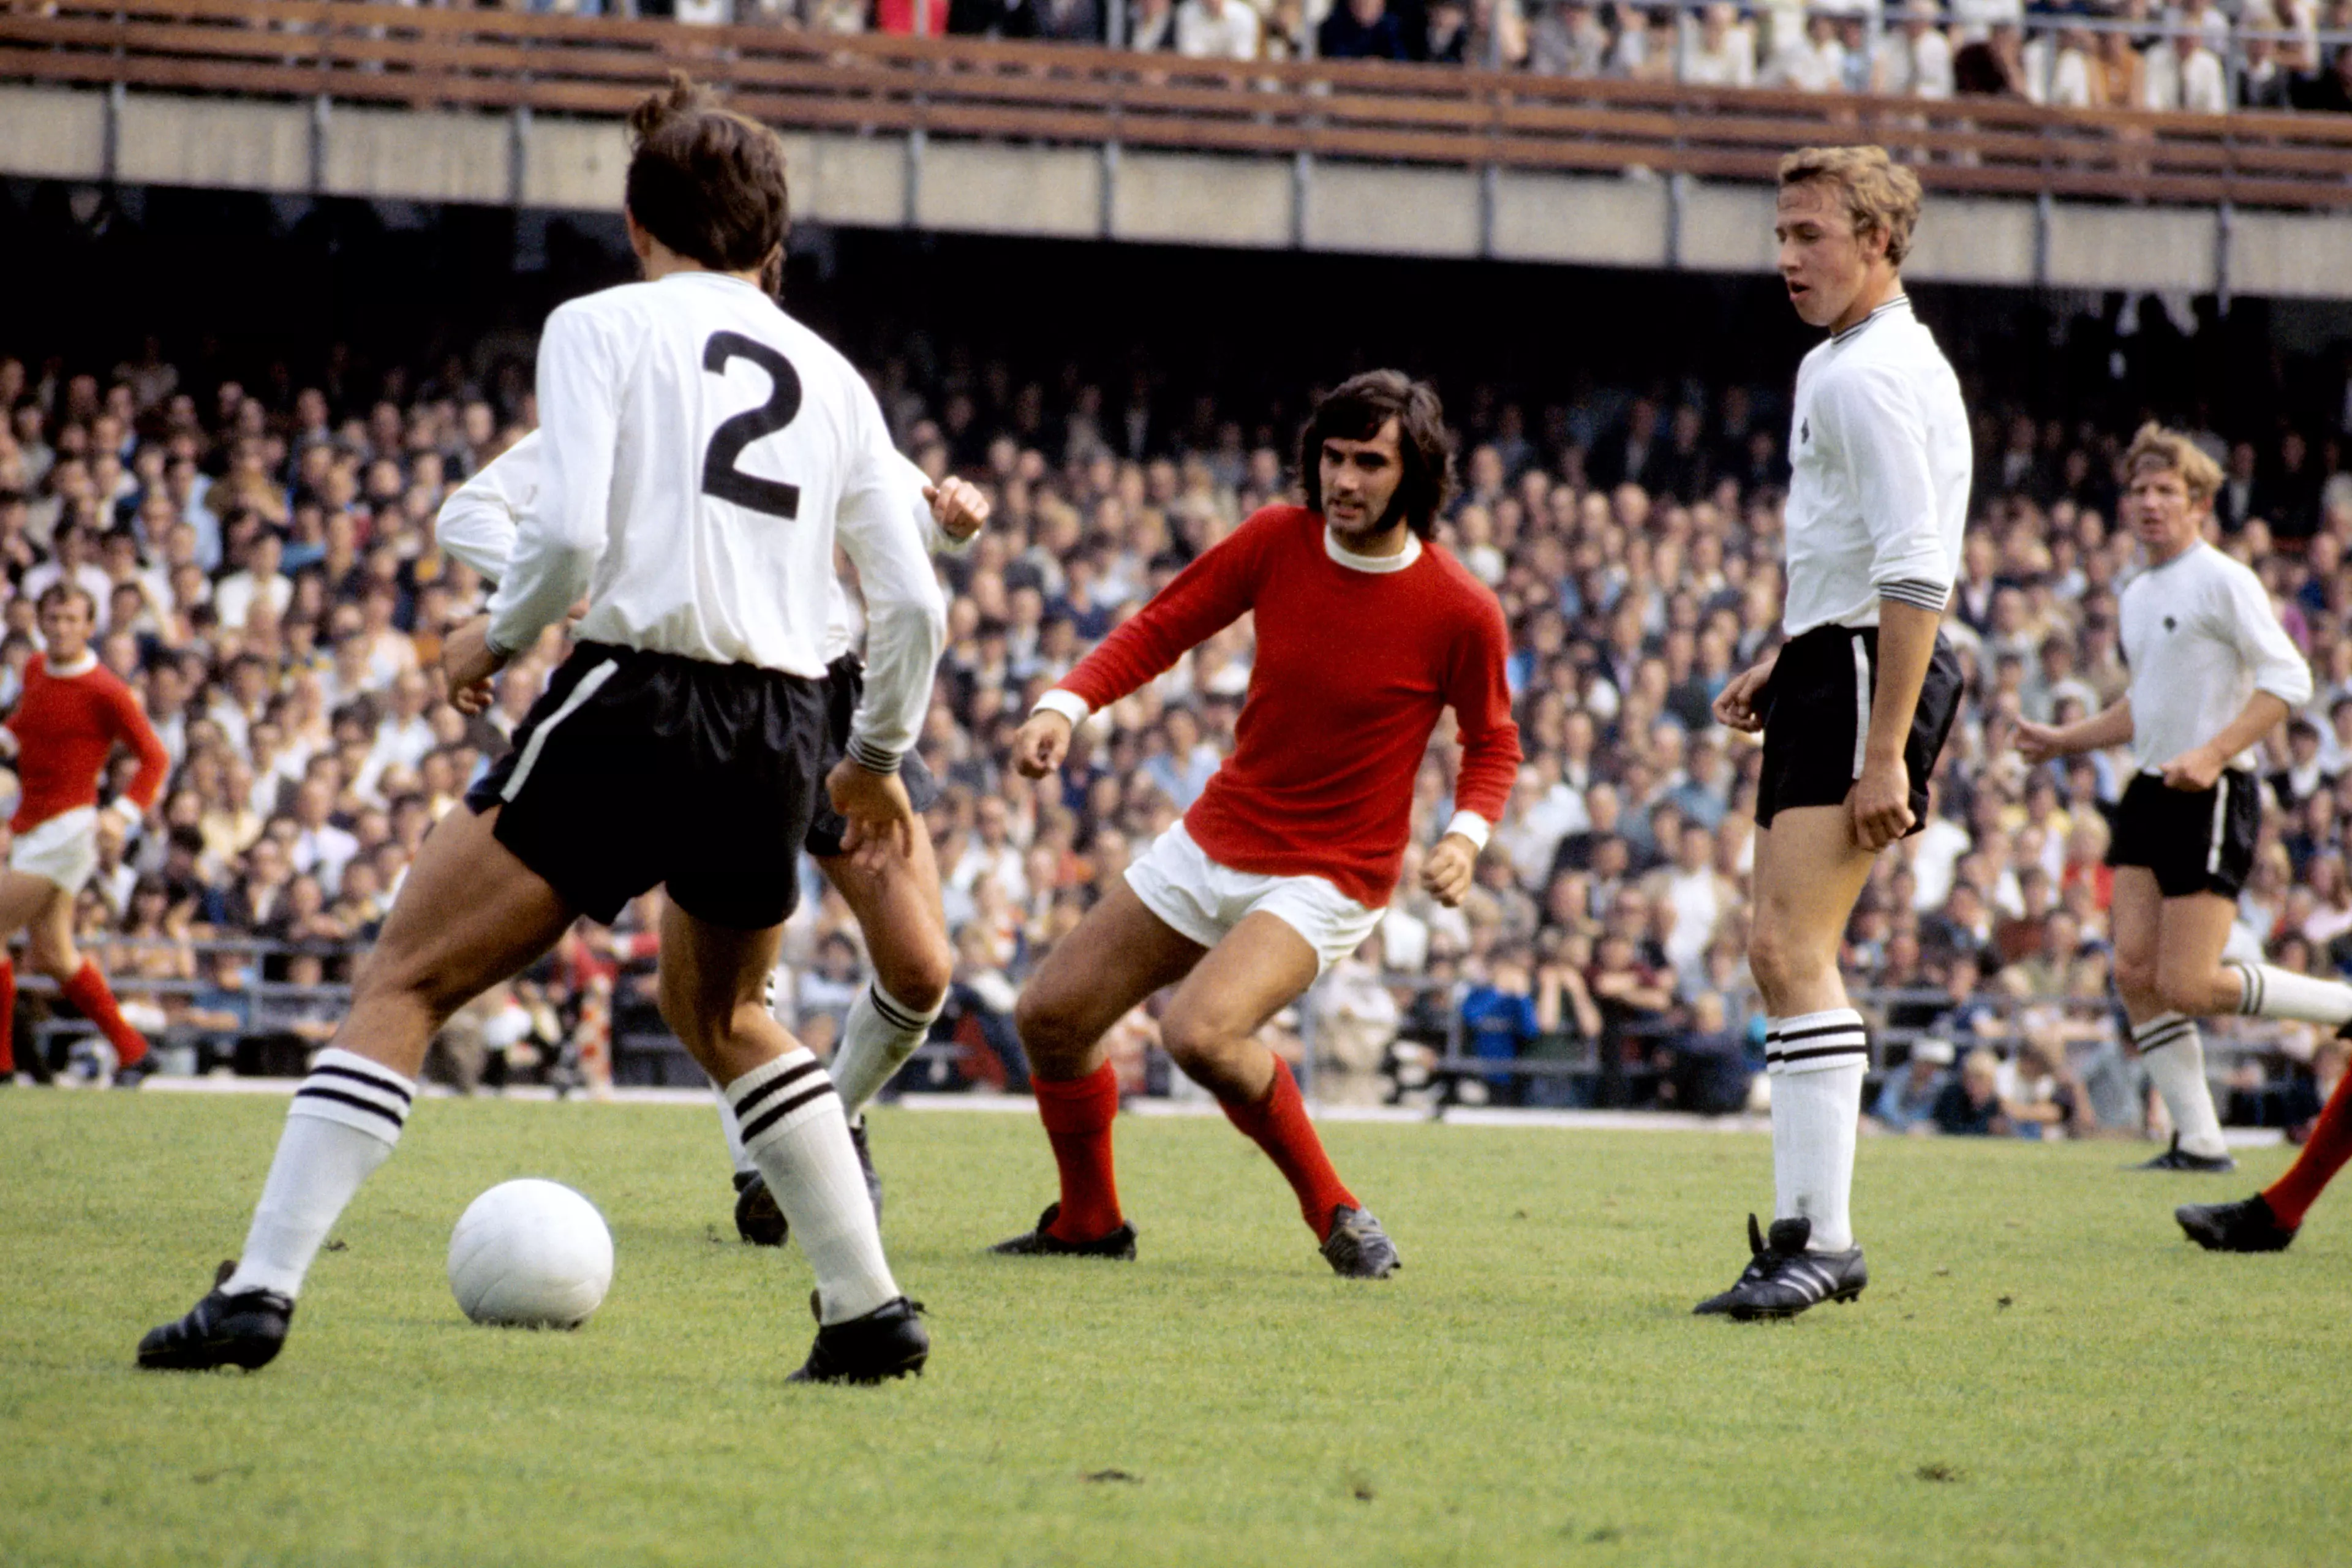 Best playing against Derby County. Image: PA Images